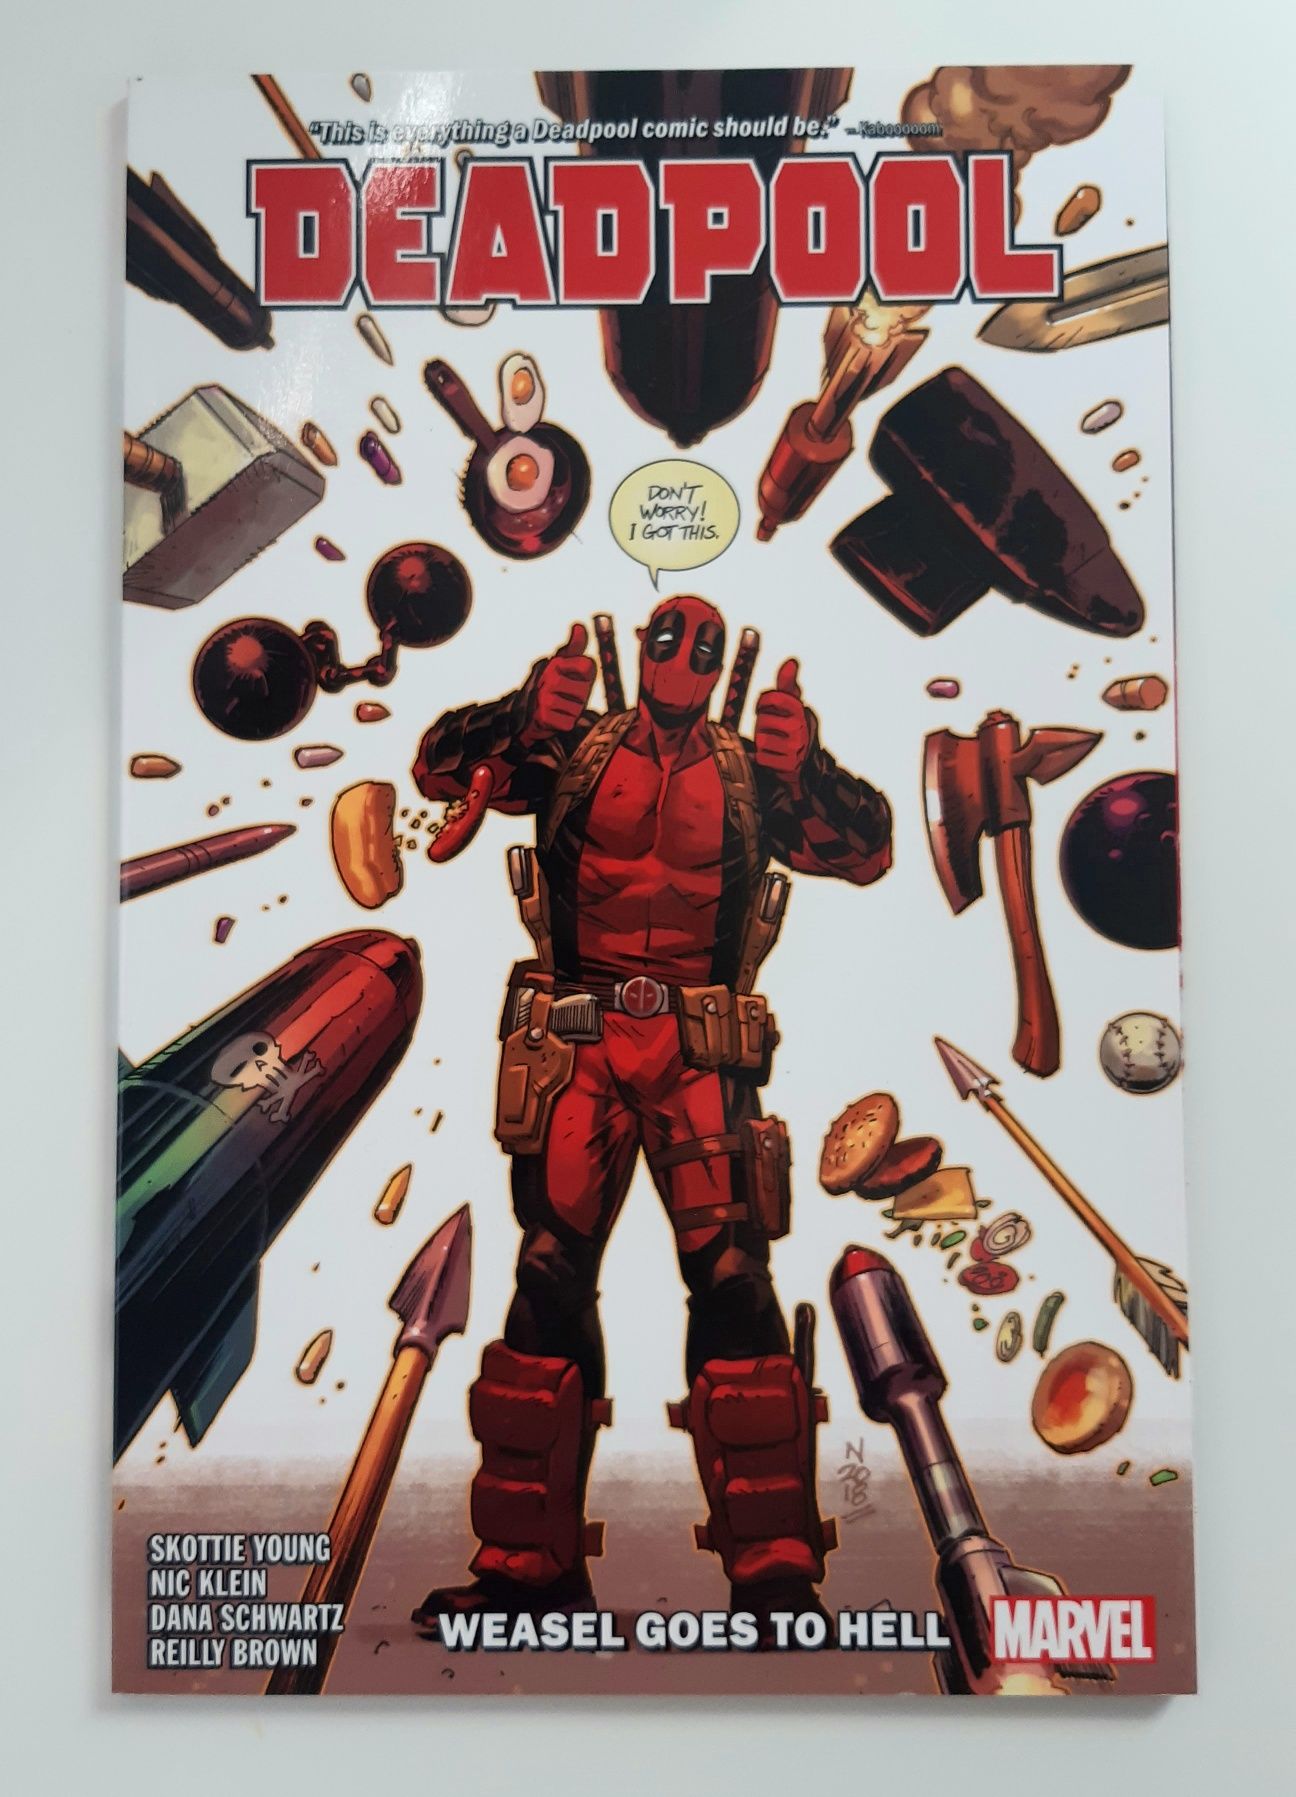 Deadpool Weasel Goes To Hell by Skottie Young